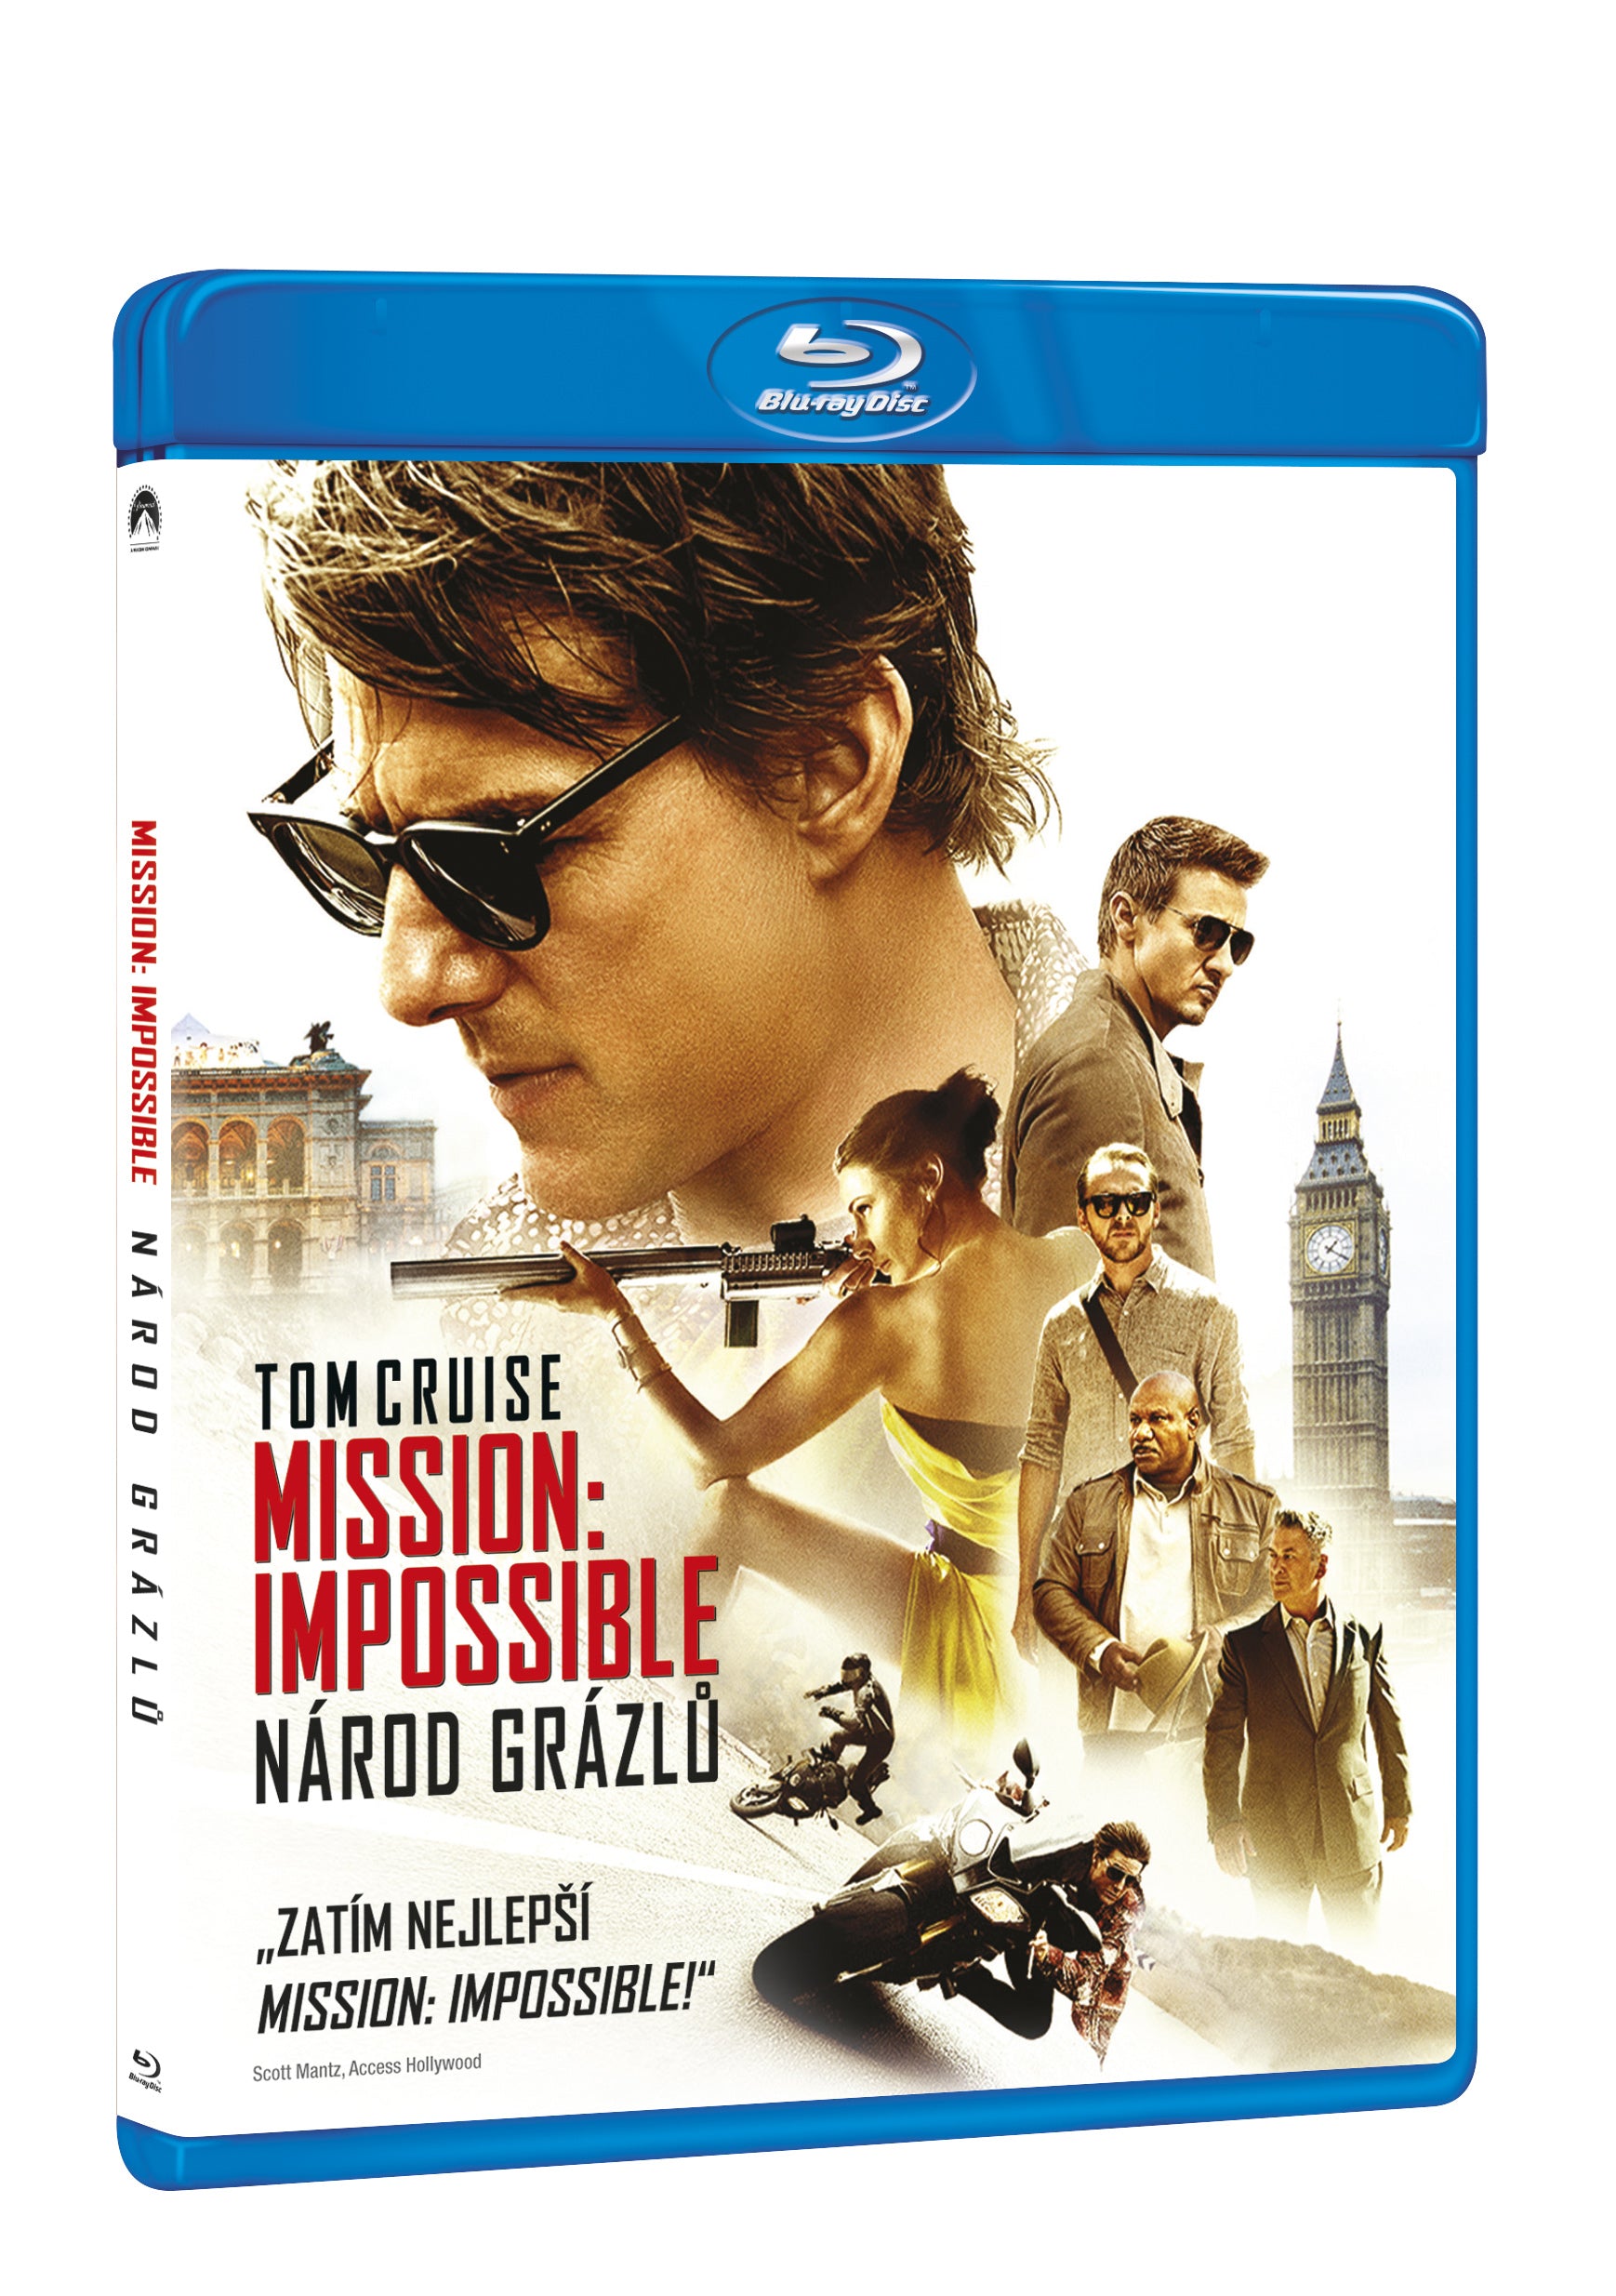 Mission: Impossible - Narod grazlu BD / Mission: Impossible - Rogue Nation - Czech version